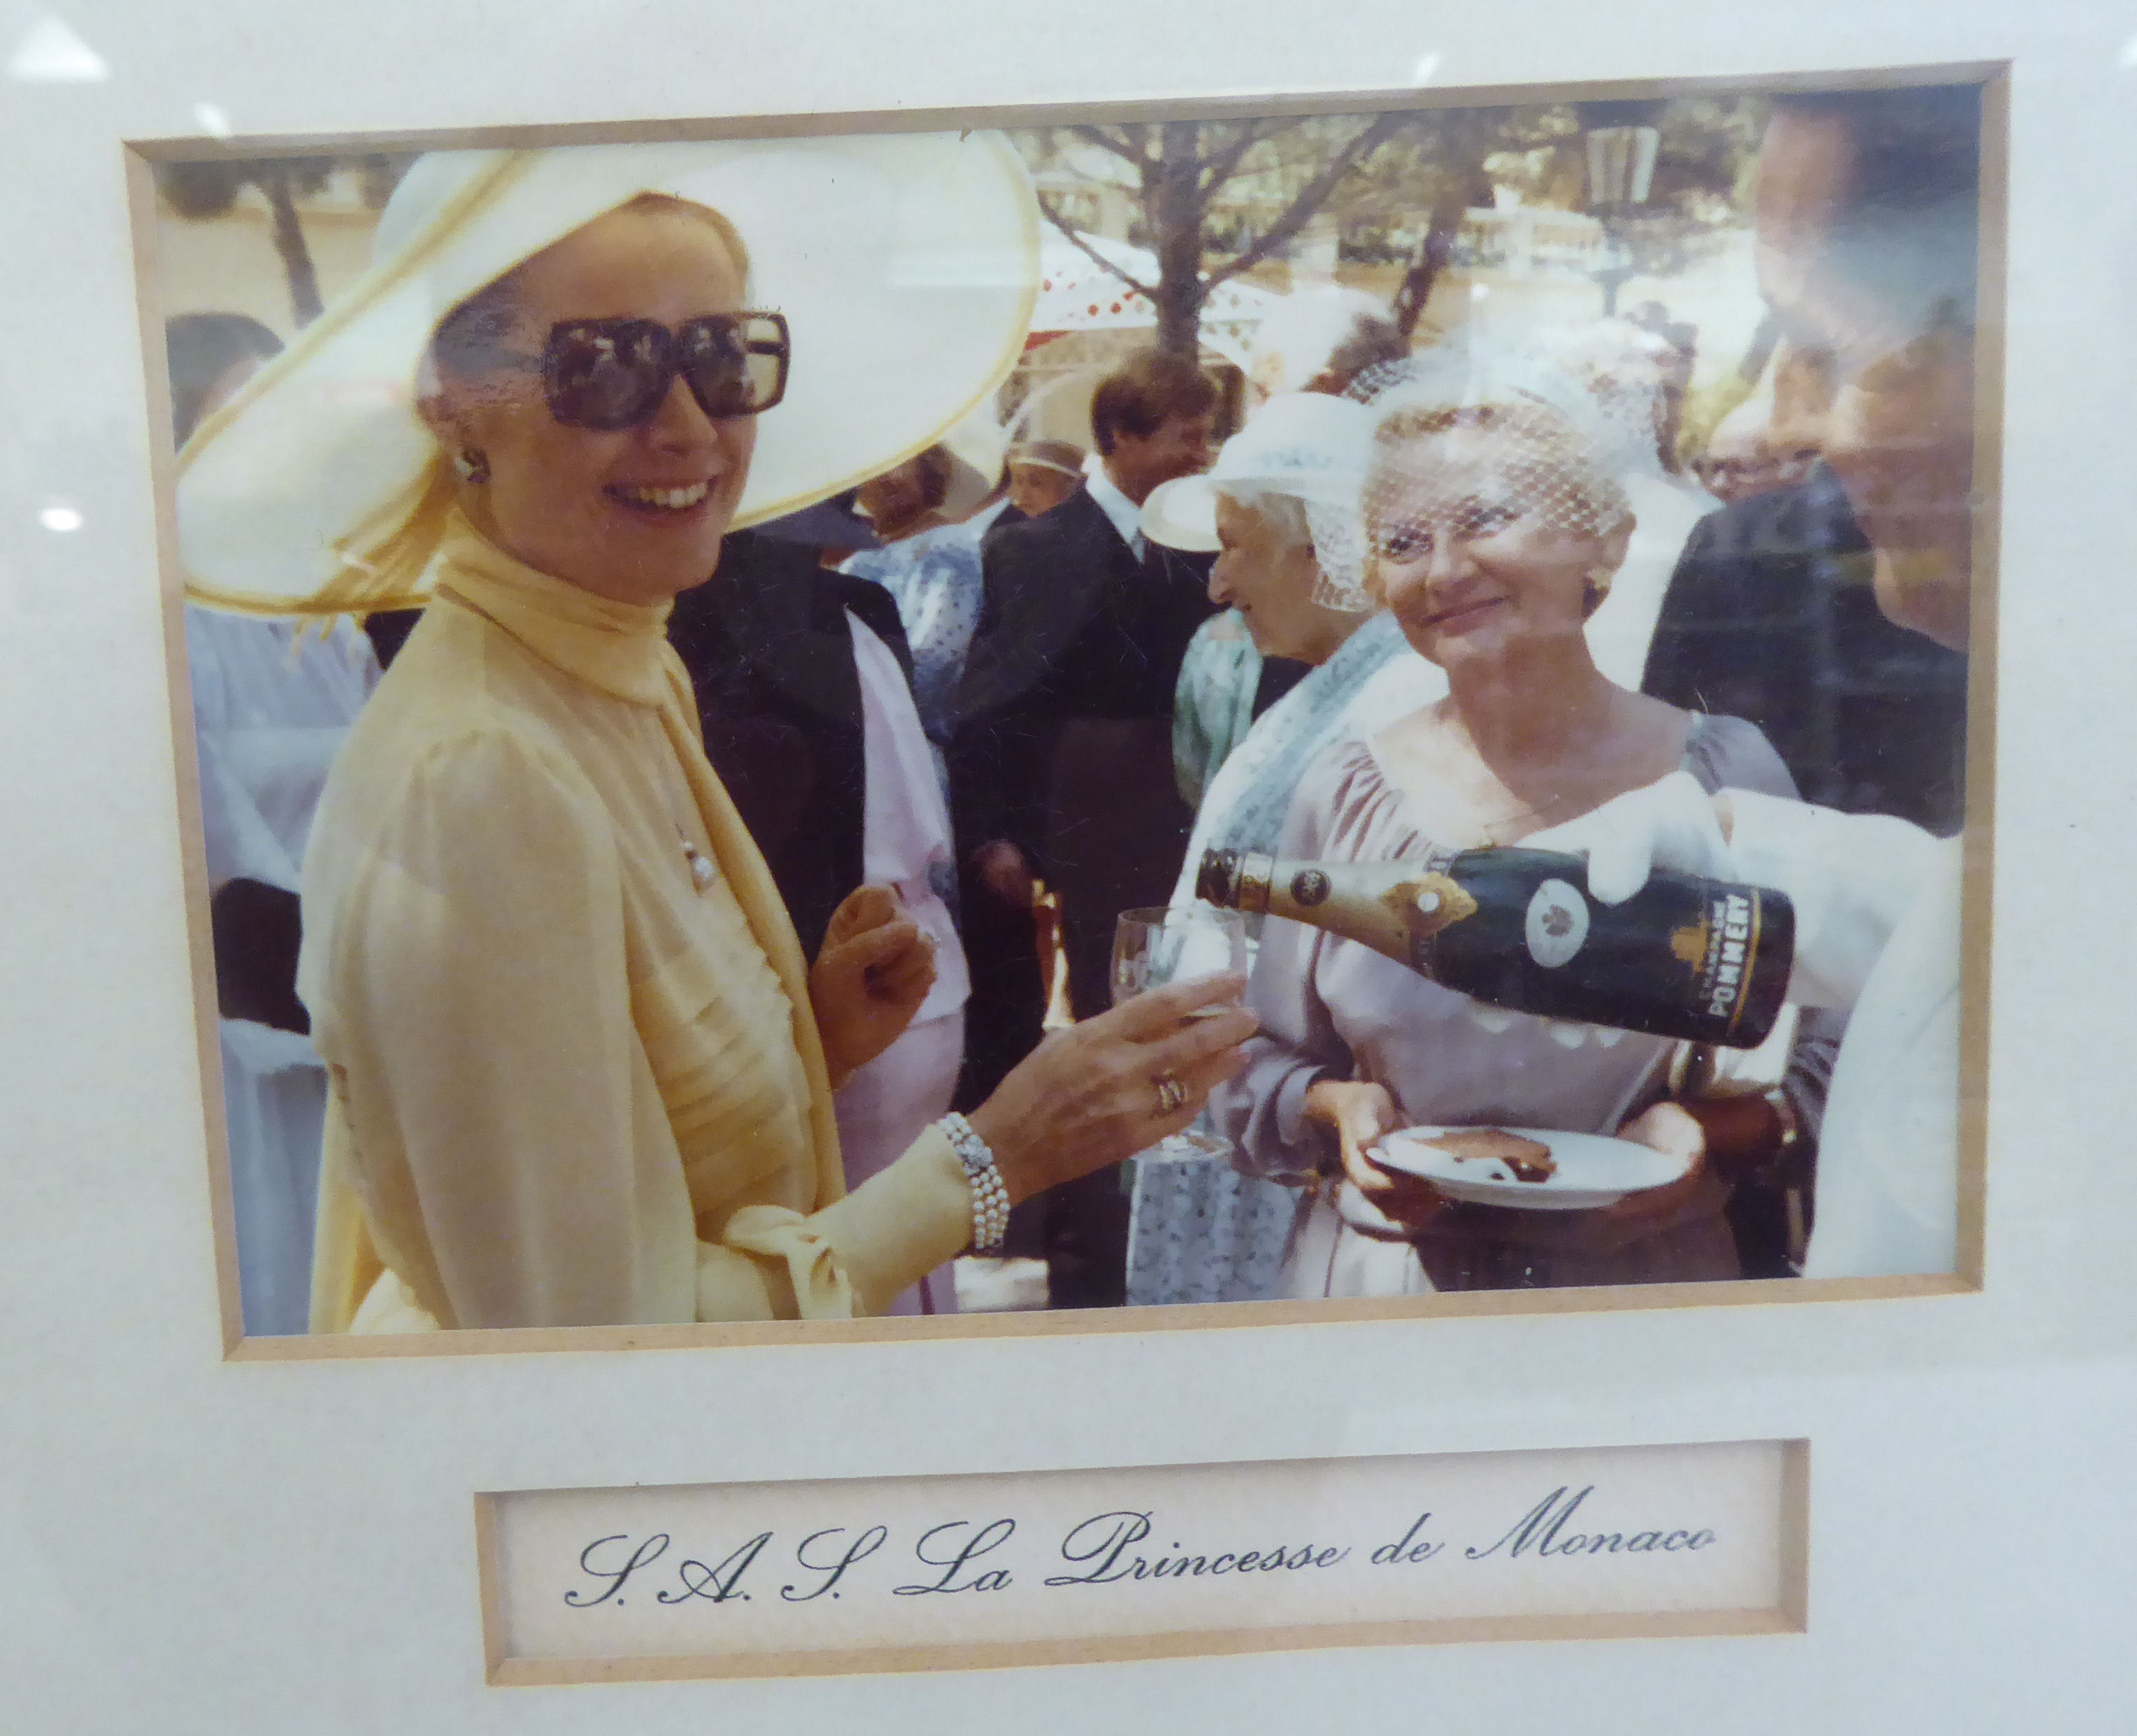 A circa 1978 collage of photographs from Princess Caroline of Monaco's wedding  15" x 23"  framed - Image 4 of 5